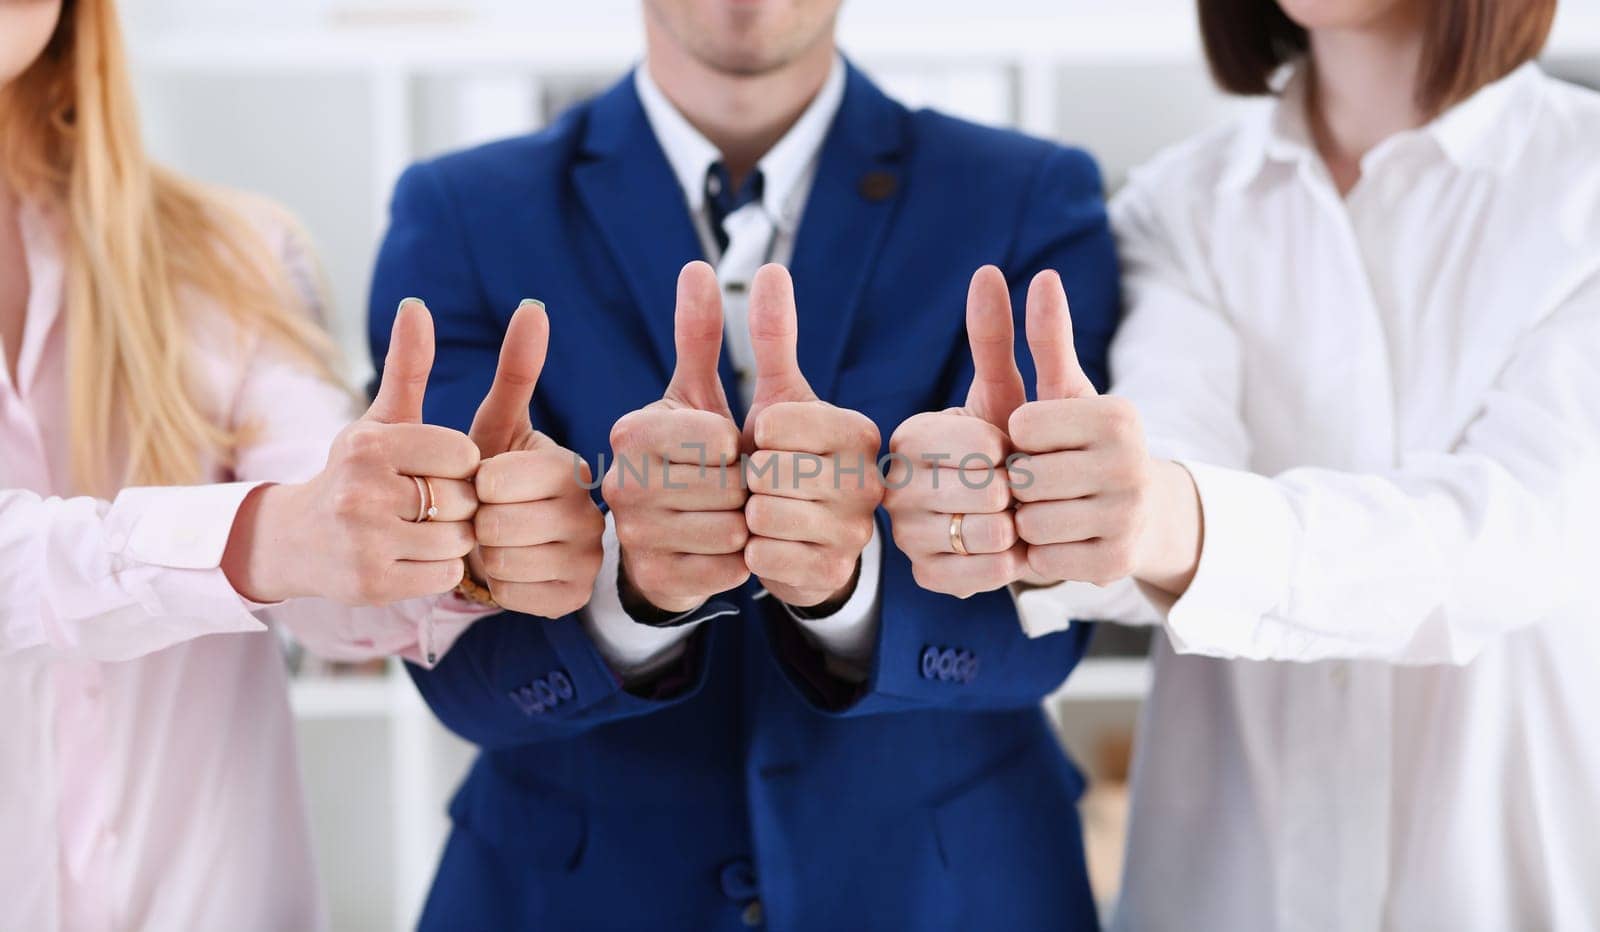 Group of people show OK or approval with thumb up during conference closeup. High level quality product serious offer excellent education mediation solution creative advisor participation concept